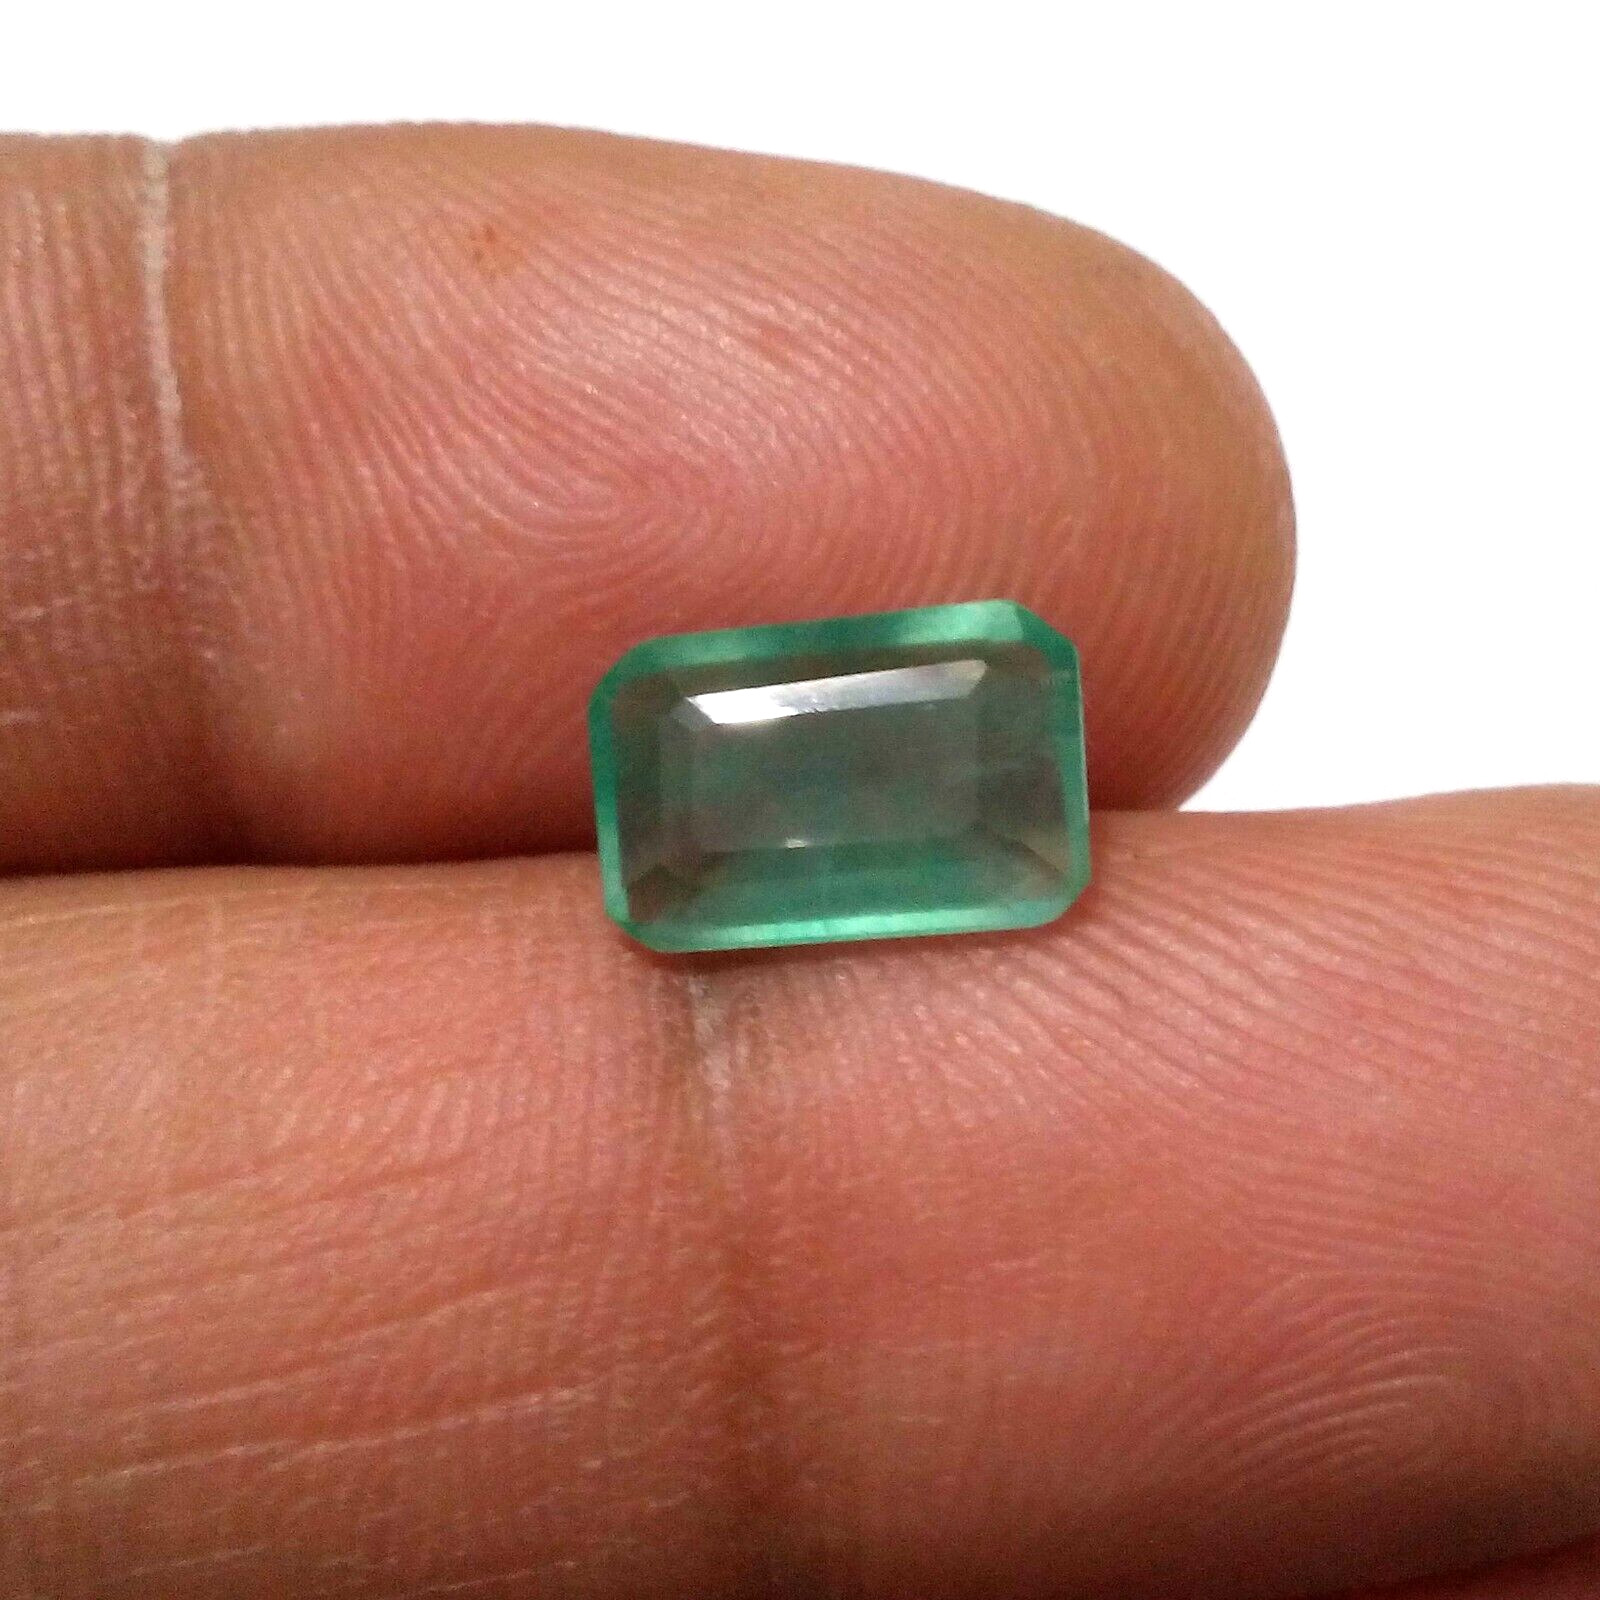 Excellent Zambian Emerald Faceted Emerald Shape 2.15 Crt Emerald Loose Gemstone